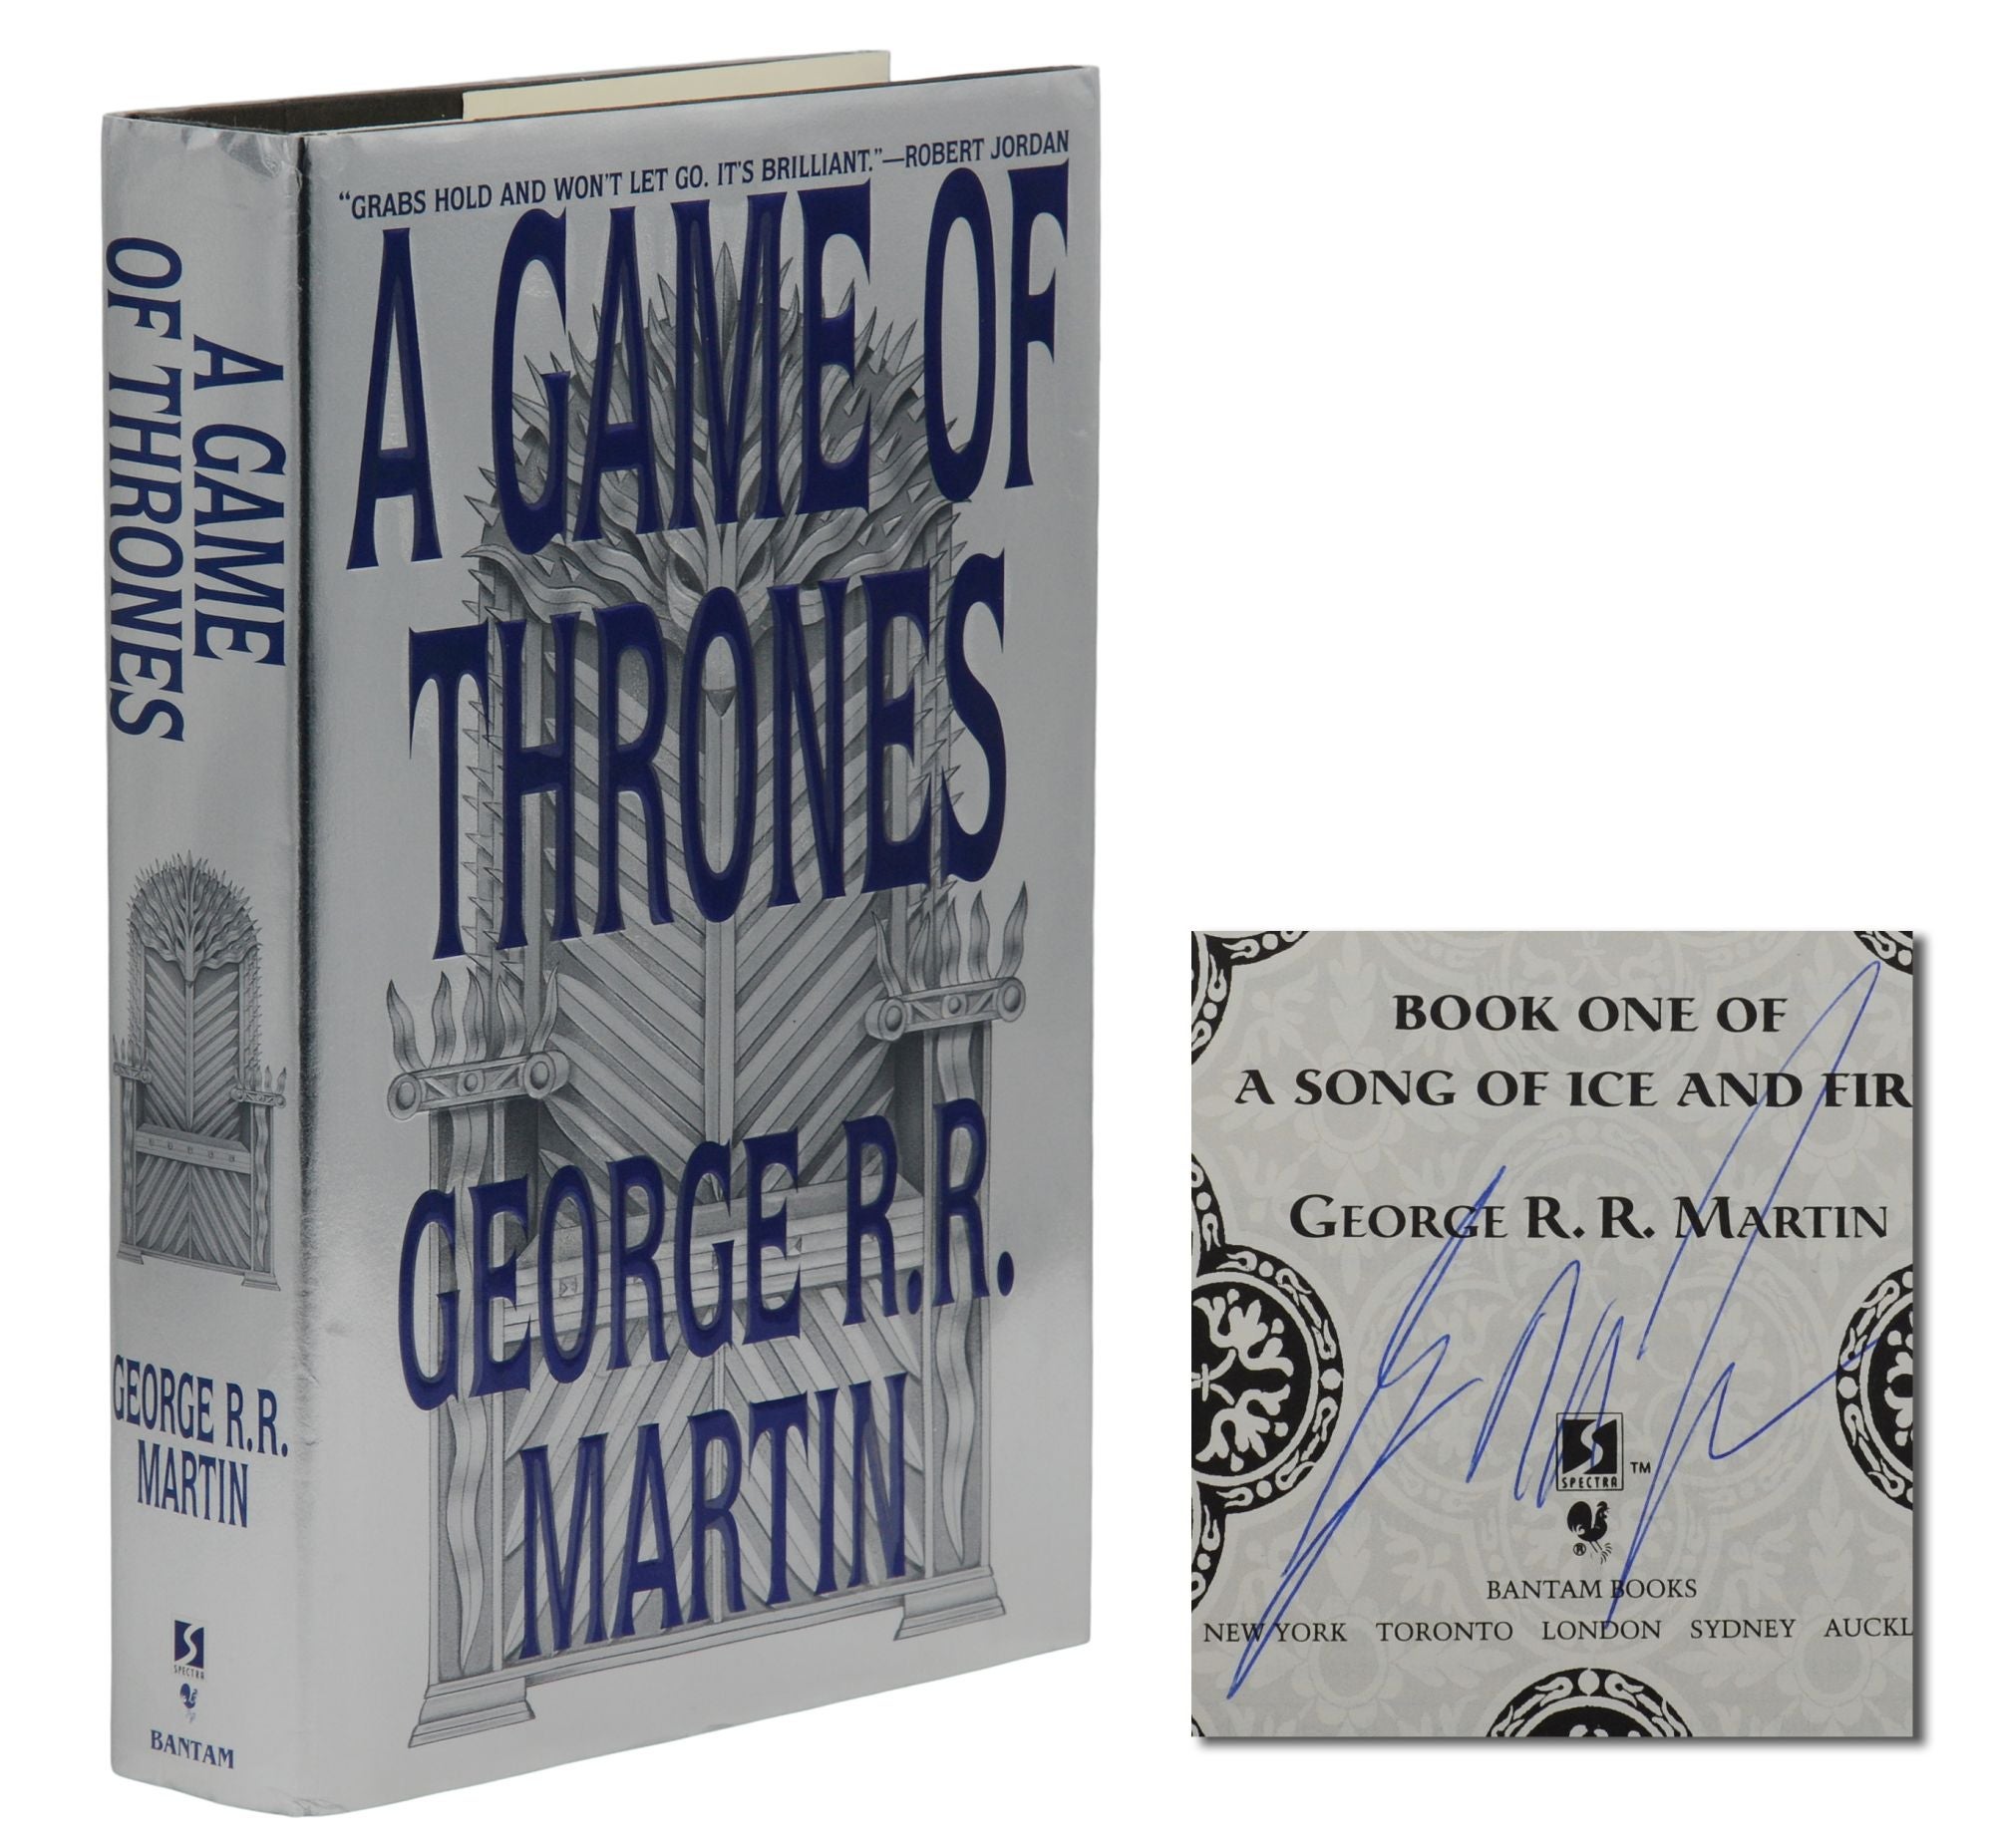 Game of Thrones : A Song of Ice and Fire 7 Books Box Set By George R R  Martin